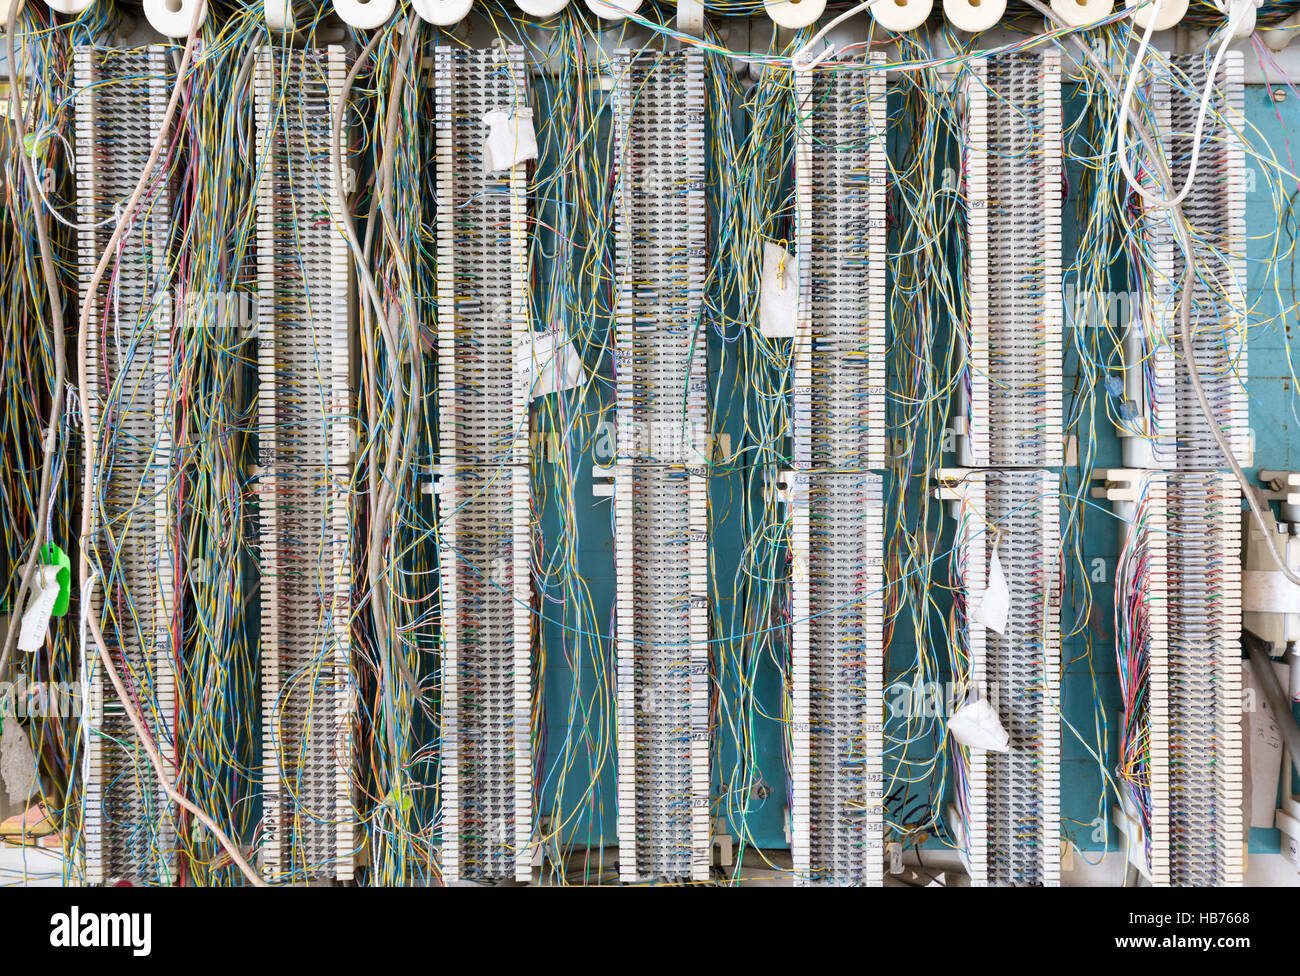 Telephone wiring panel on wall for telecoms Stock Photo